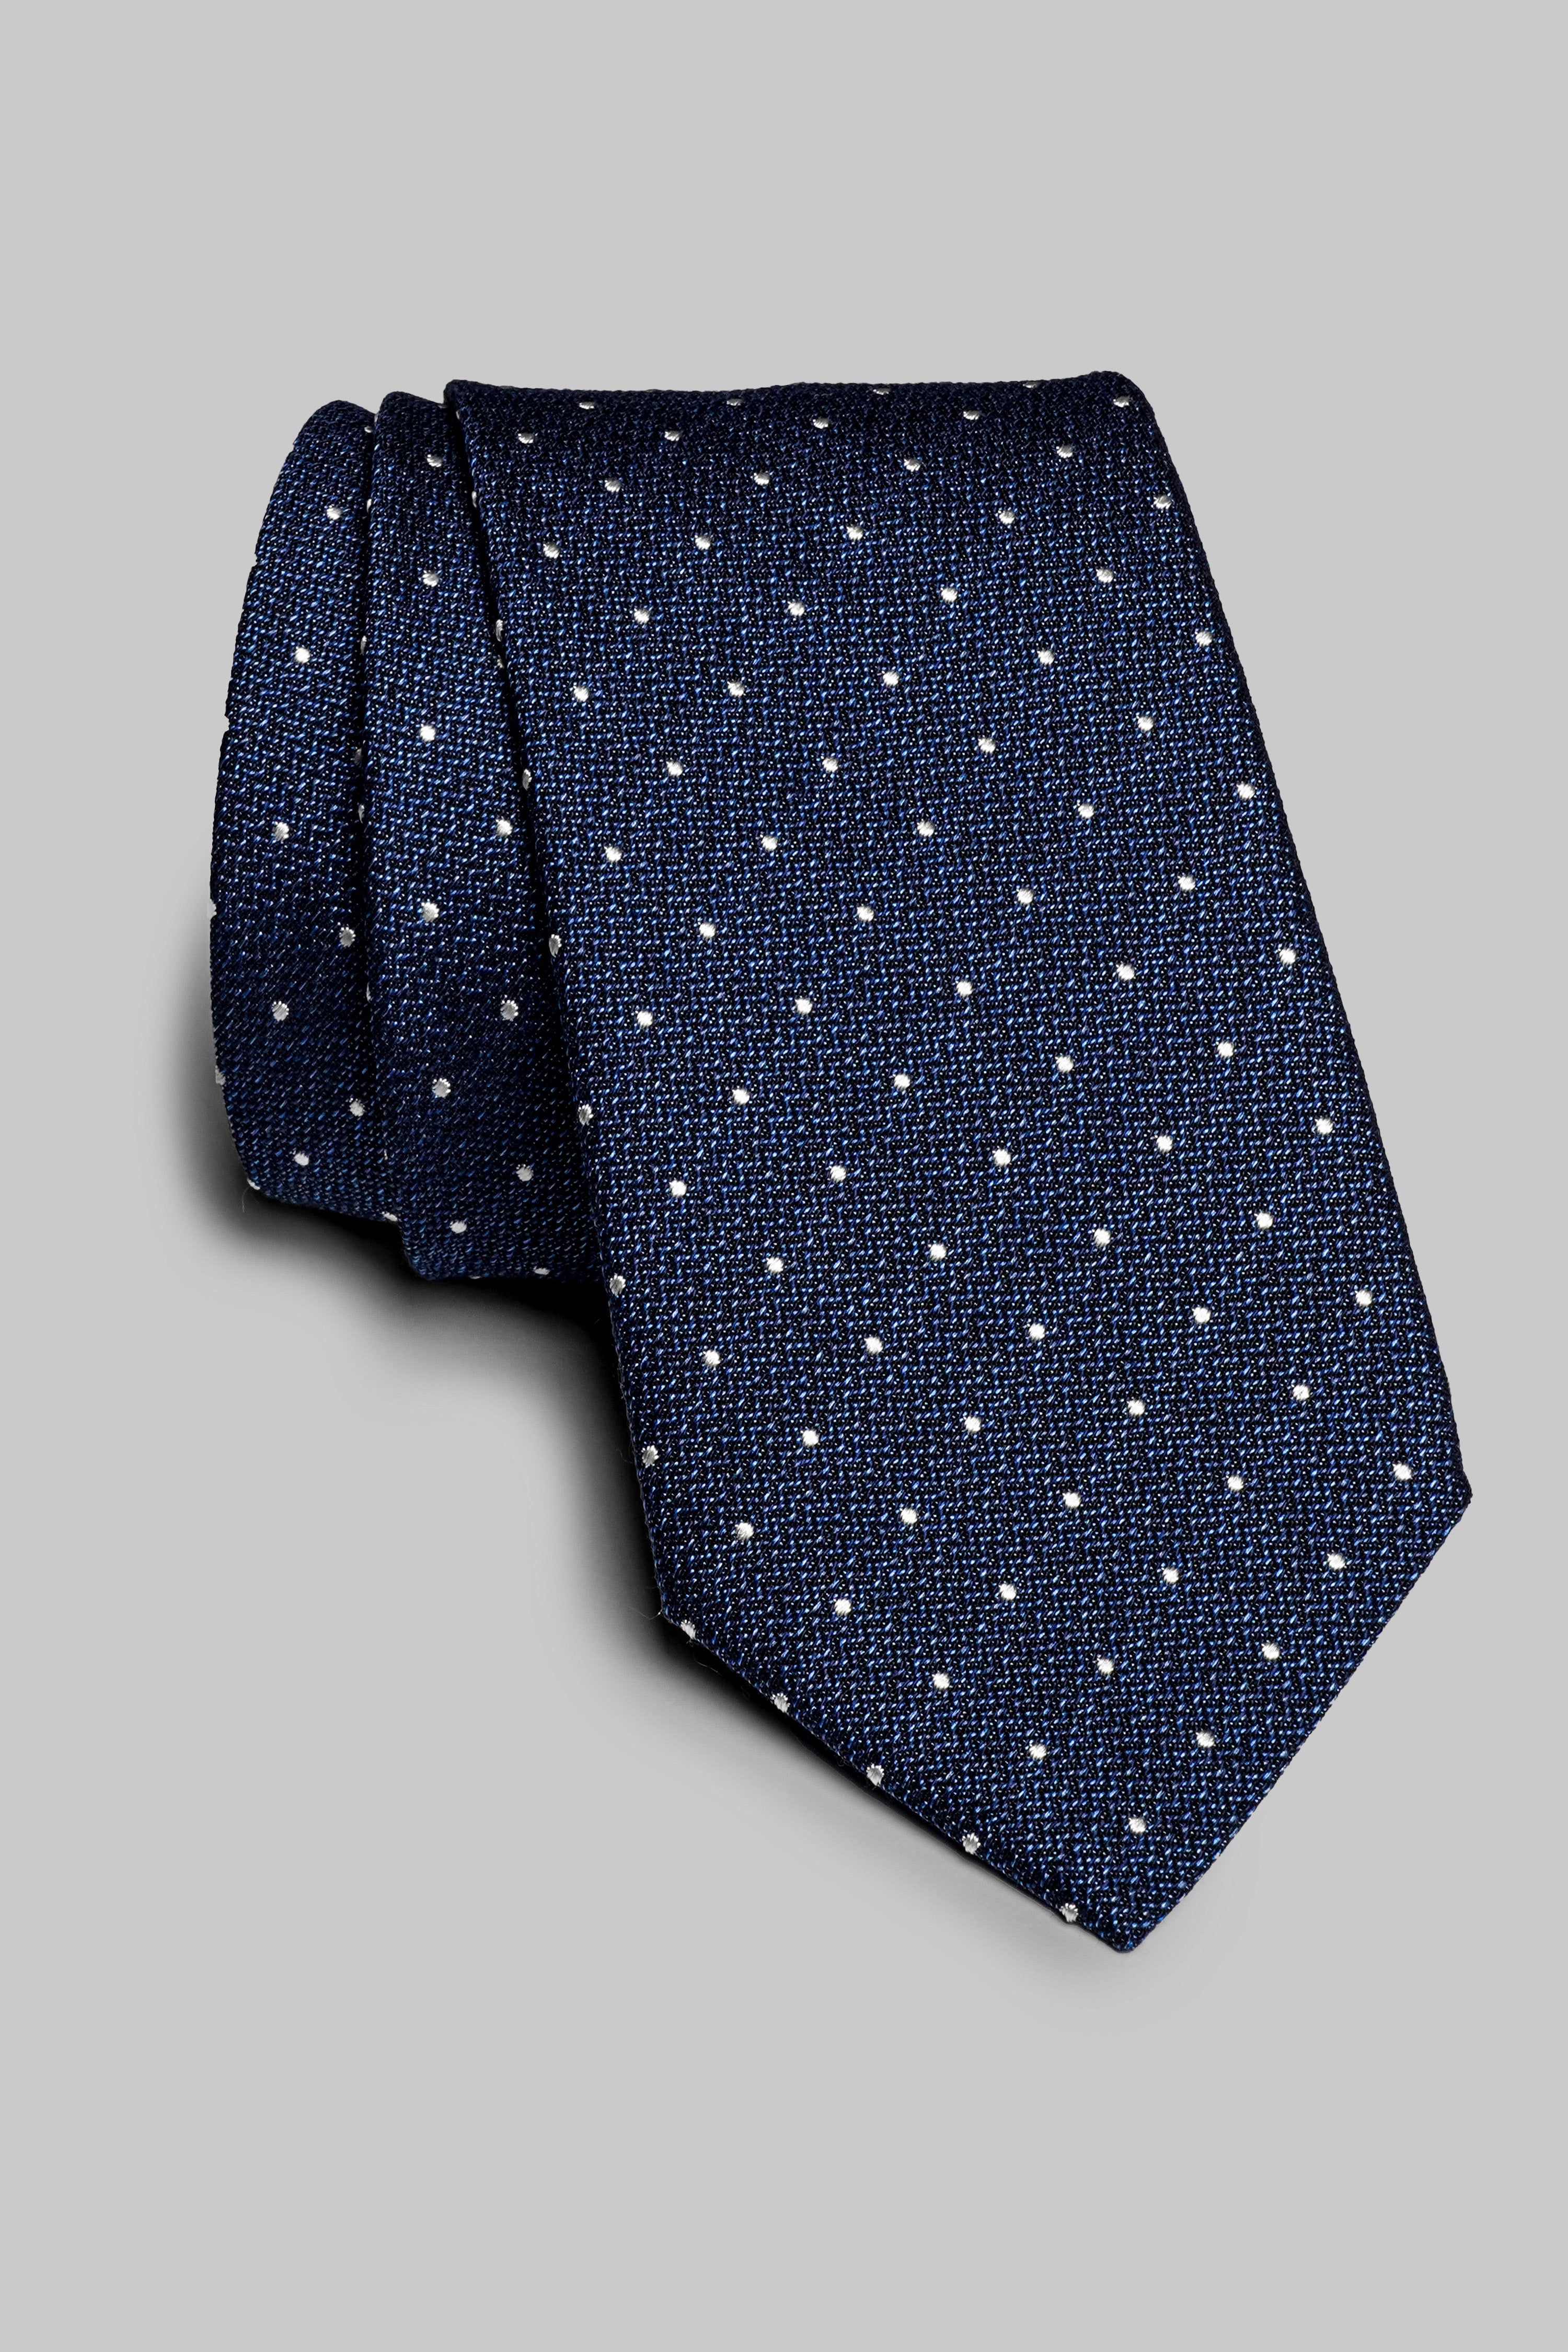 Alt view 1 Pindot Woven Tie in Palace Blue